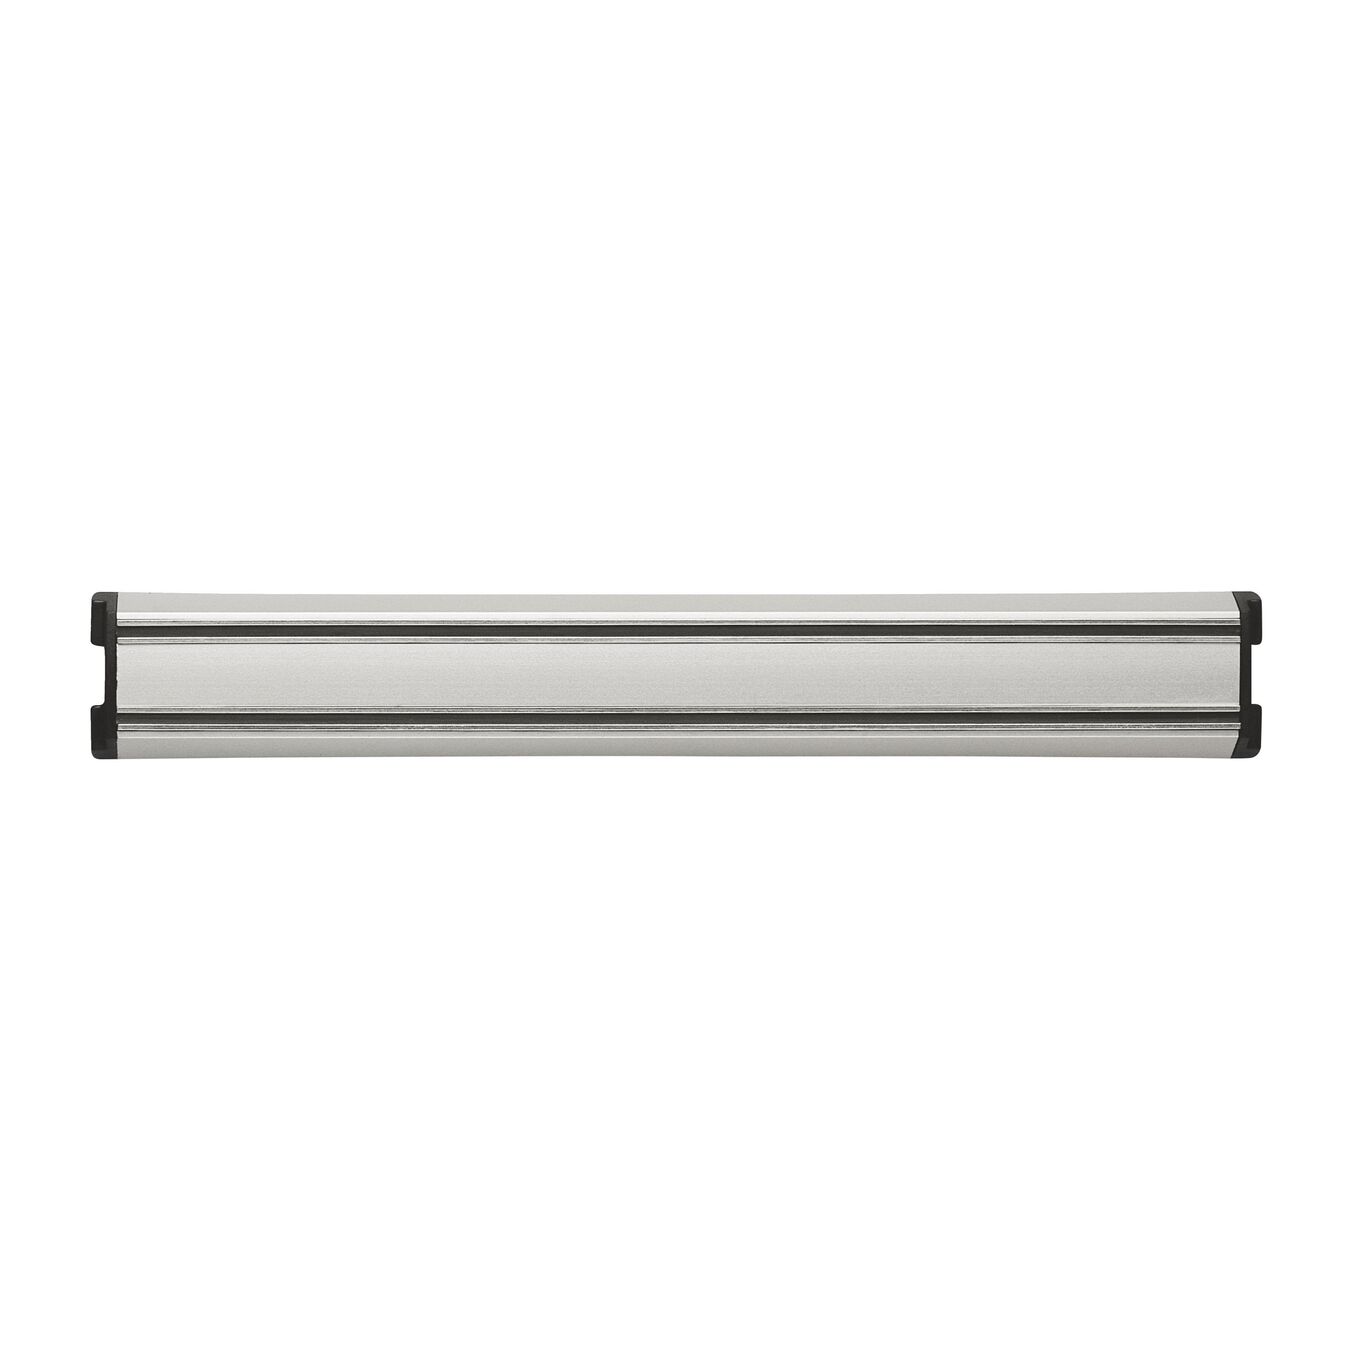 11.5-inch, aluminum, Magnetic knife bar, silver,,large 1